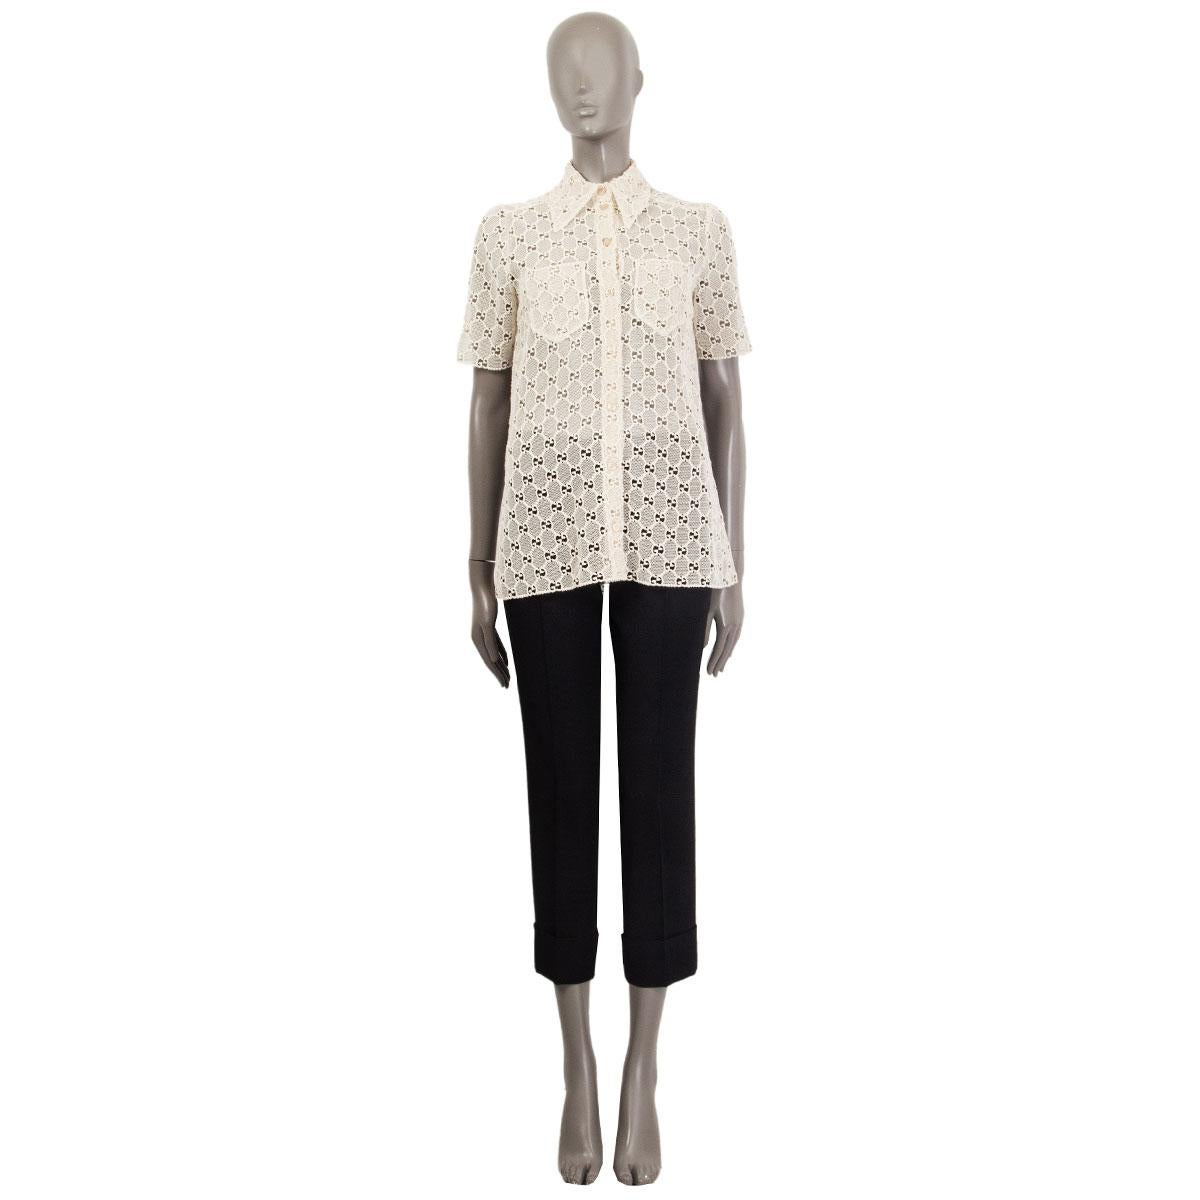 100% authentic Gucci GG Macrame short sleeve shirt in sheer off-white cotton (77%) and polyester (23%) (please note content tag has been removed). Features a point collar and front pockets. Has been worn and is in excellent condition.

See matching